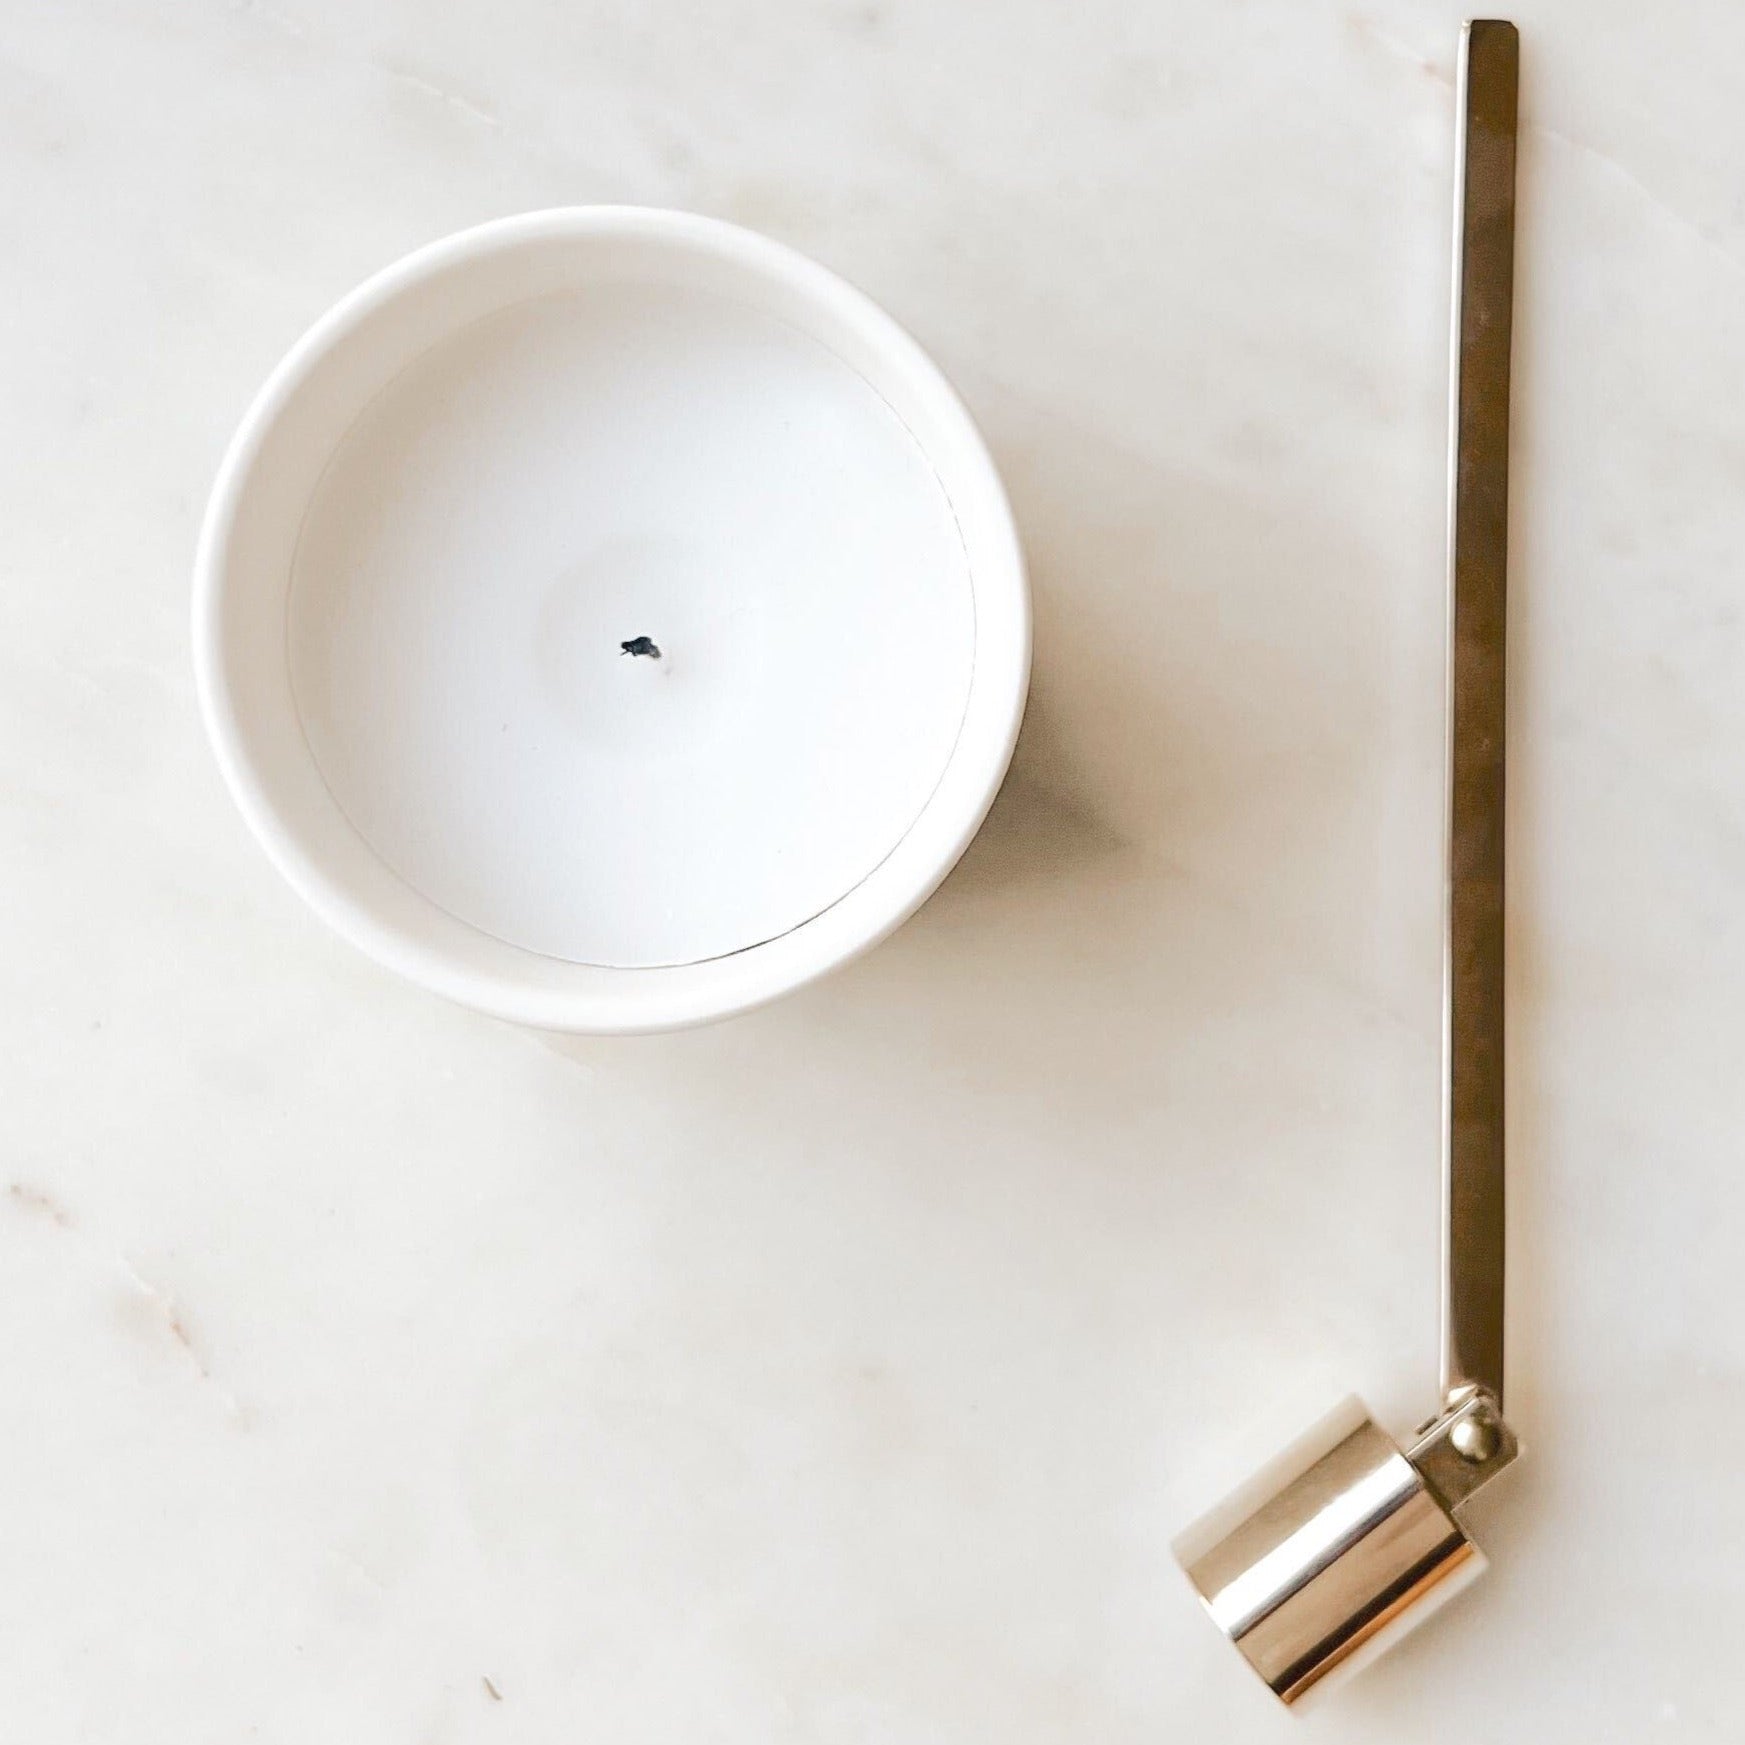 A gold candle snuffer laying next to a white Fiat Lux Copenhagen candle on a white marble table.